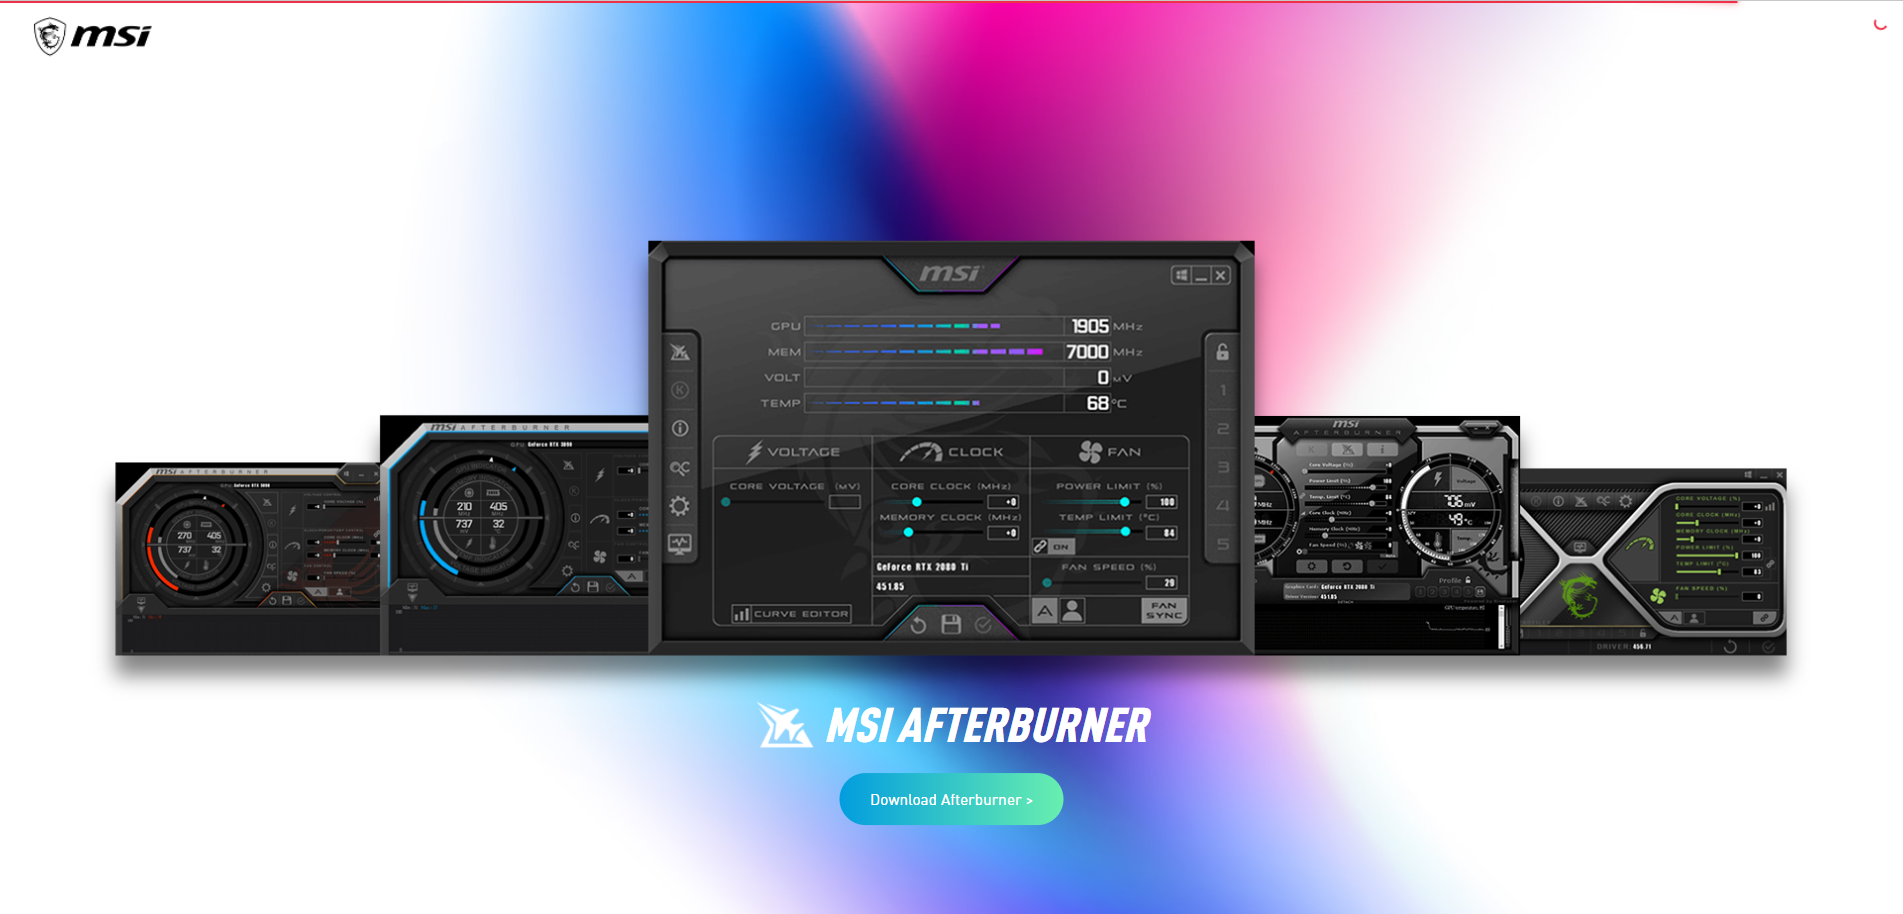 If you are not sure how to reduce your GPU clock, you can use the MSI Afterburner software